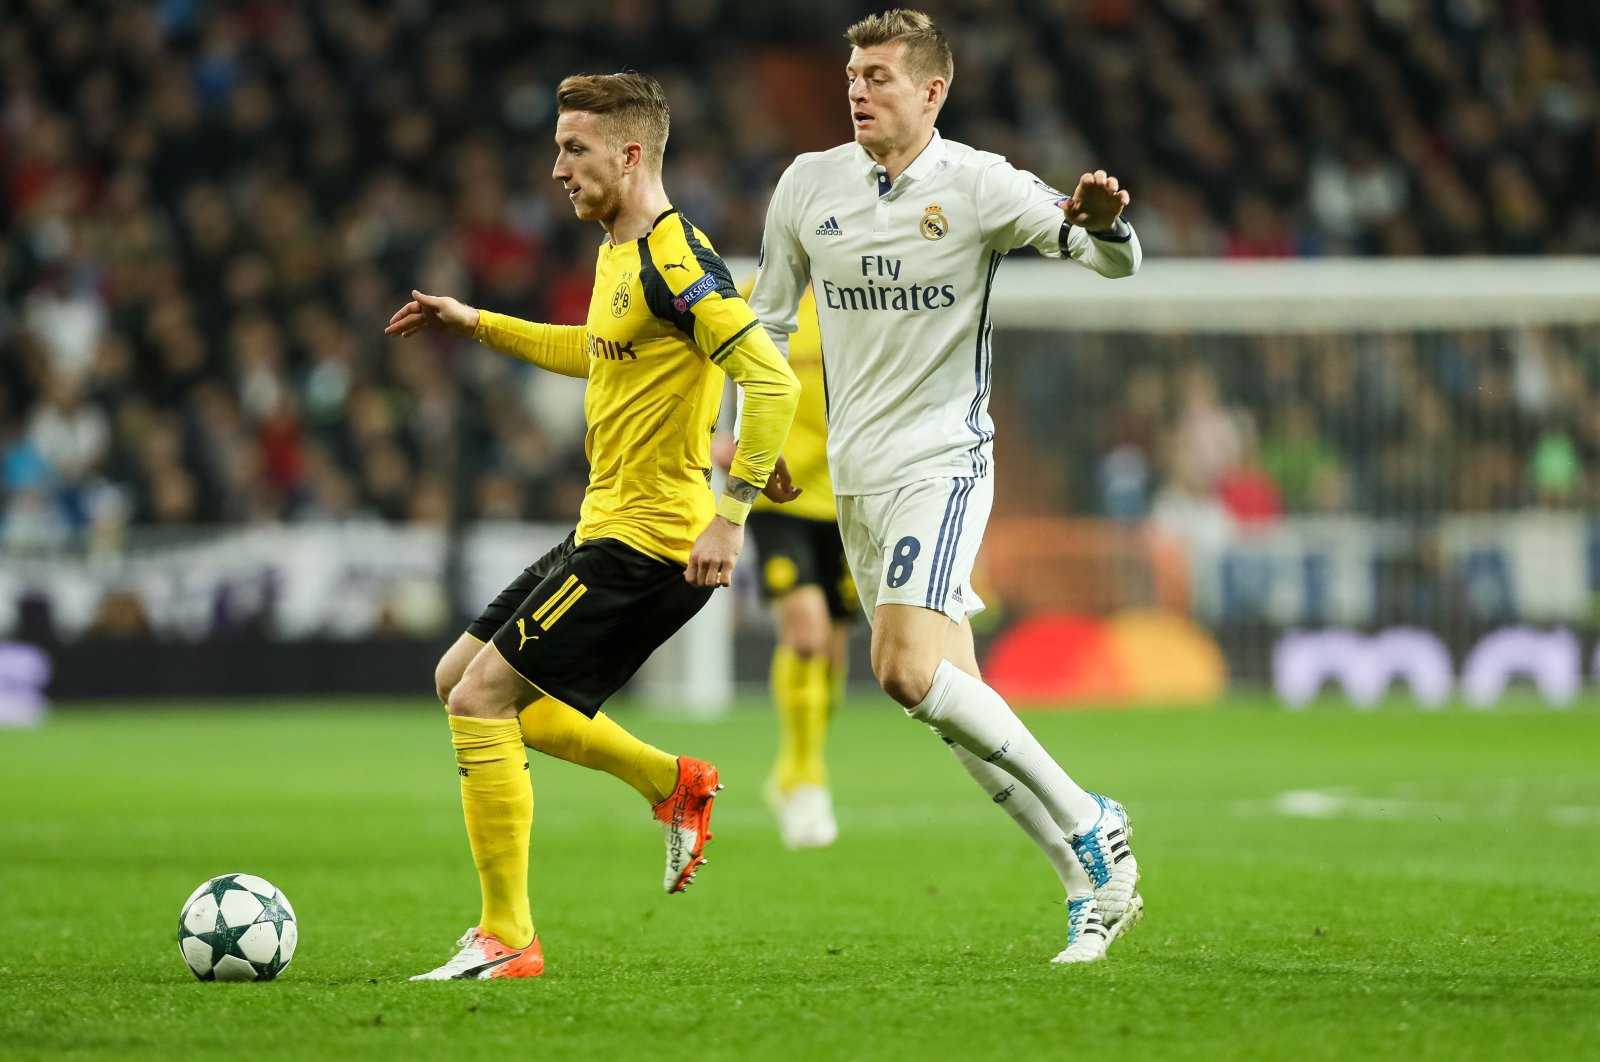 Borussia Dortmund&#039;s Marco Reus (L) and Real Madrid&#039;s Toni Kroos battle for the ball  during the UEFA Champions League match at the Santiago Bernabeu, Madrid, Spain, Dec. 7, 2016. (Getty Images Photo)